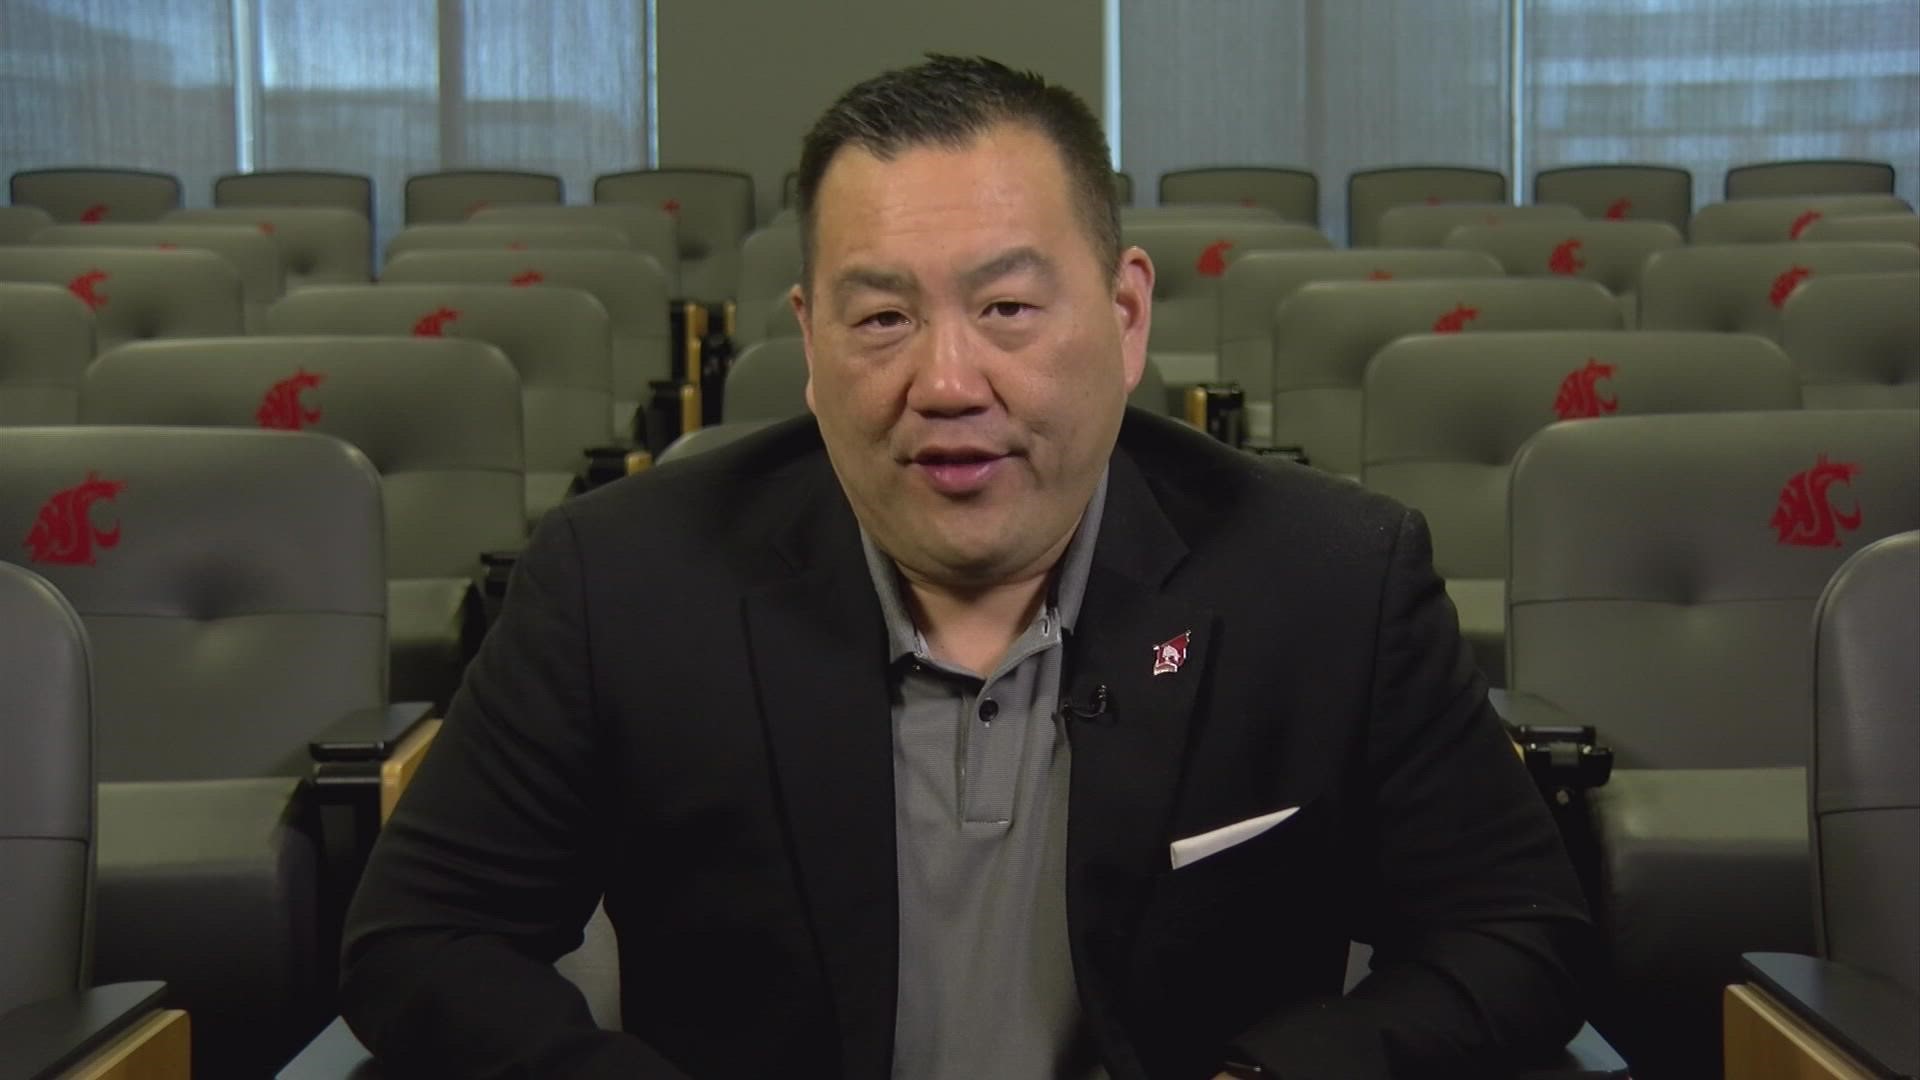 Pat Chun is the director of athletics at Washington State University. He says the AAPI community has a long history of impacting this country and the state of Ohio.